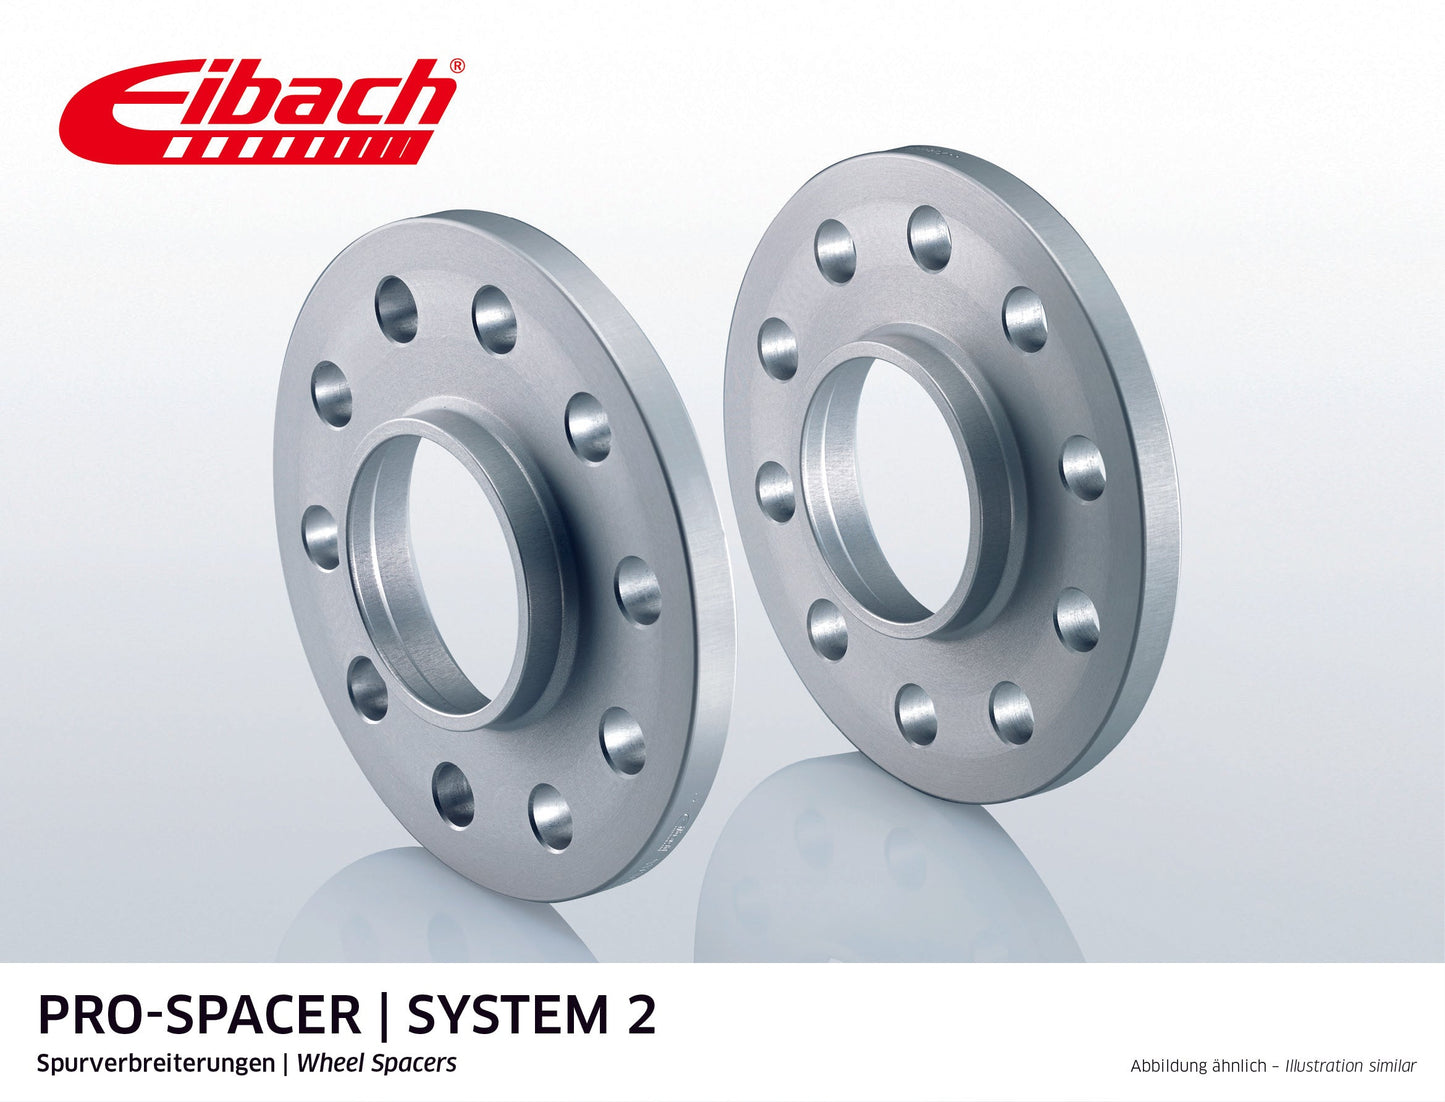 Eibach Pro-Spacer Kit (Pair Of Spacers) 10mm Per Spacer (System 2) S90-2-10-027 (Silver) at £103.59